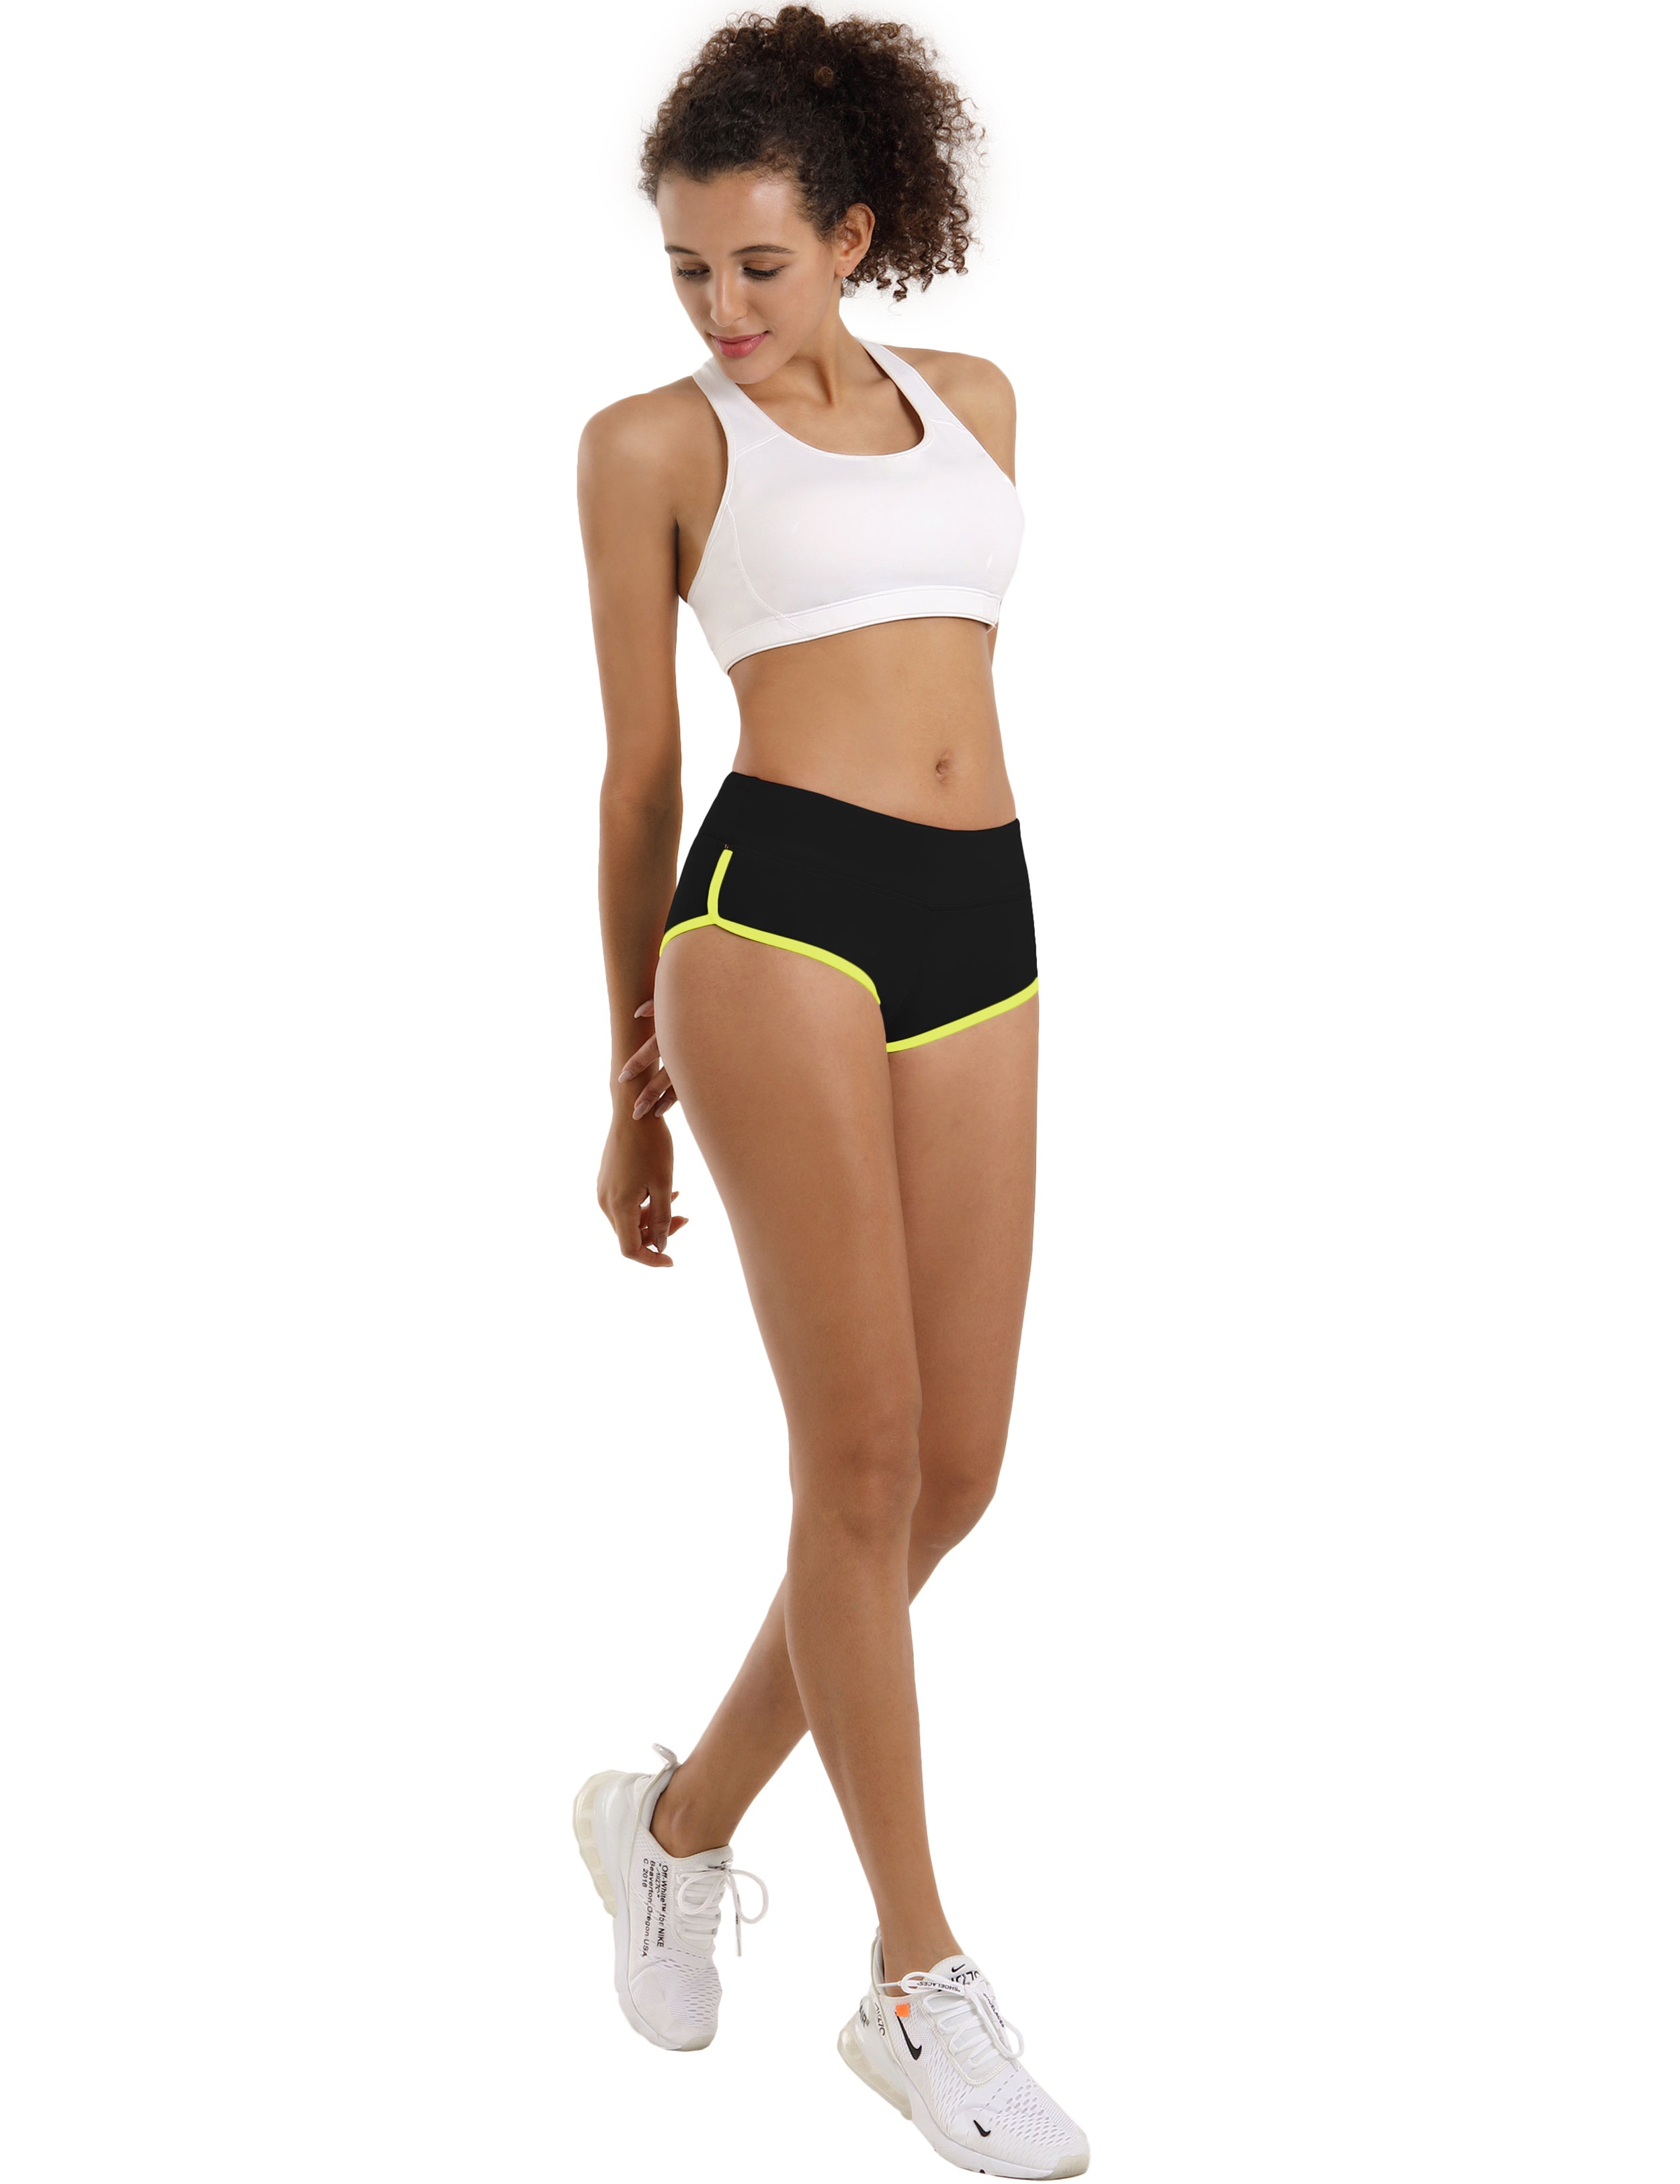 Sexy Booty Pilates Shorts black_fluorescentyellow Sleek, soft, smooth and totally comfortable: our newest sexy style is here. Softest-ever fabric High elasticity High density 4-way stretch Fabric doesn't attract lint easily No see-through Moisture-wicking Machine wash 75%Nylon/25%Spandex